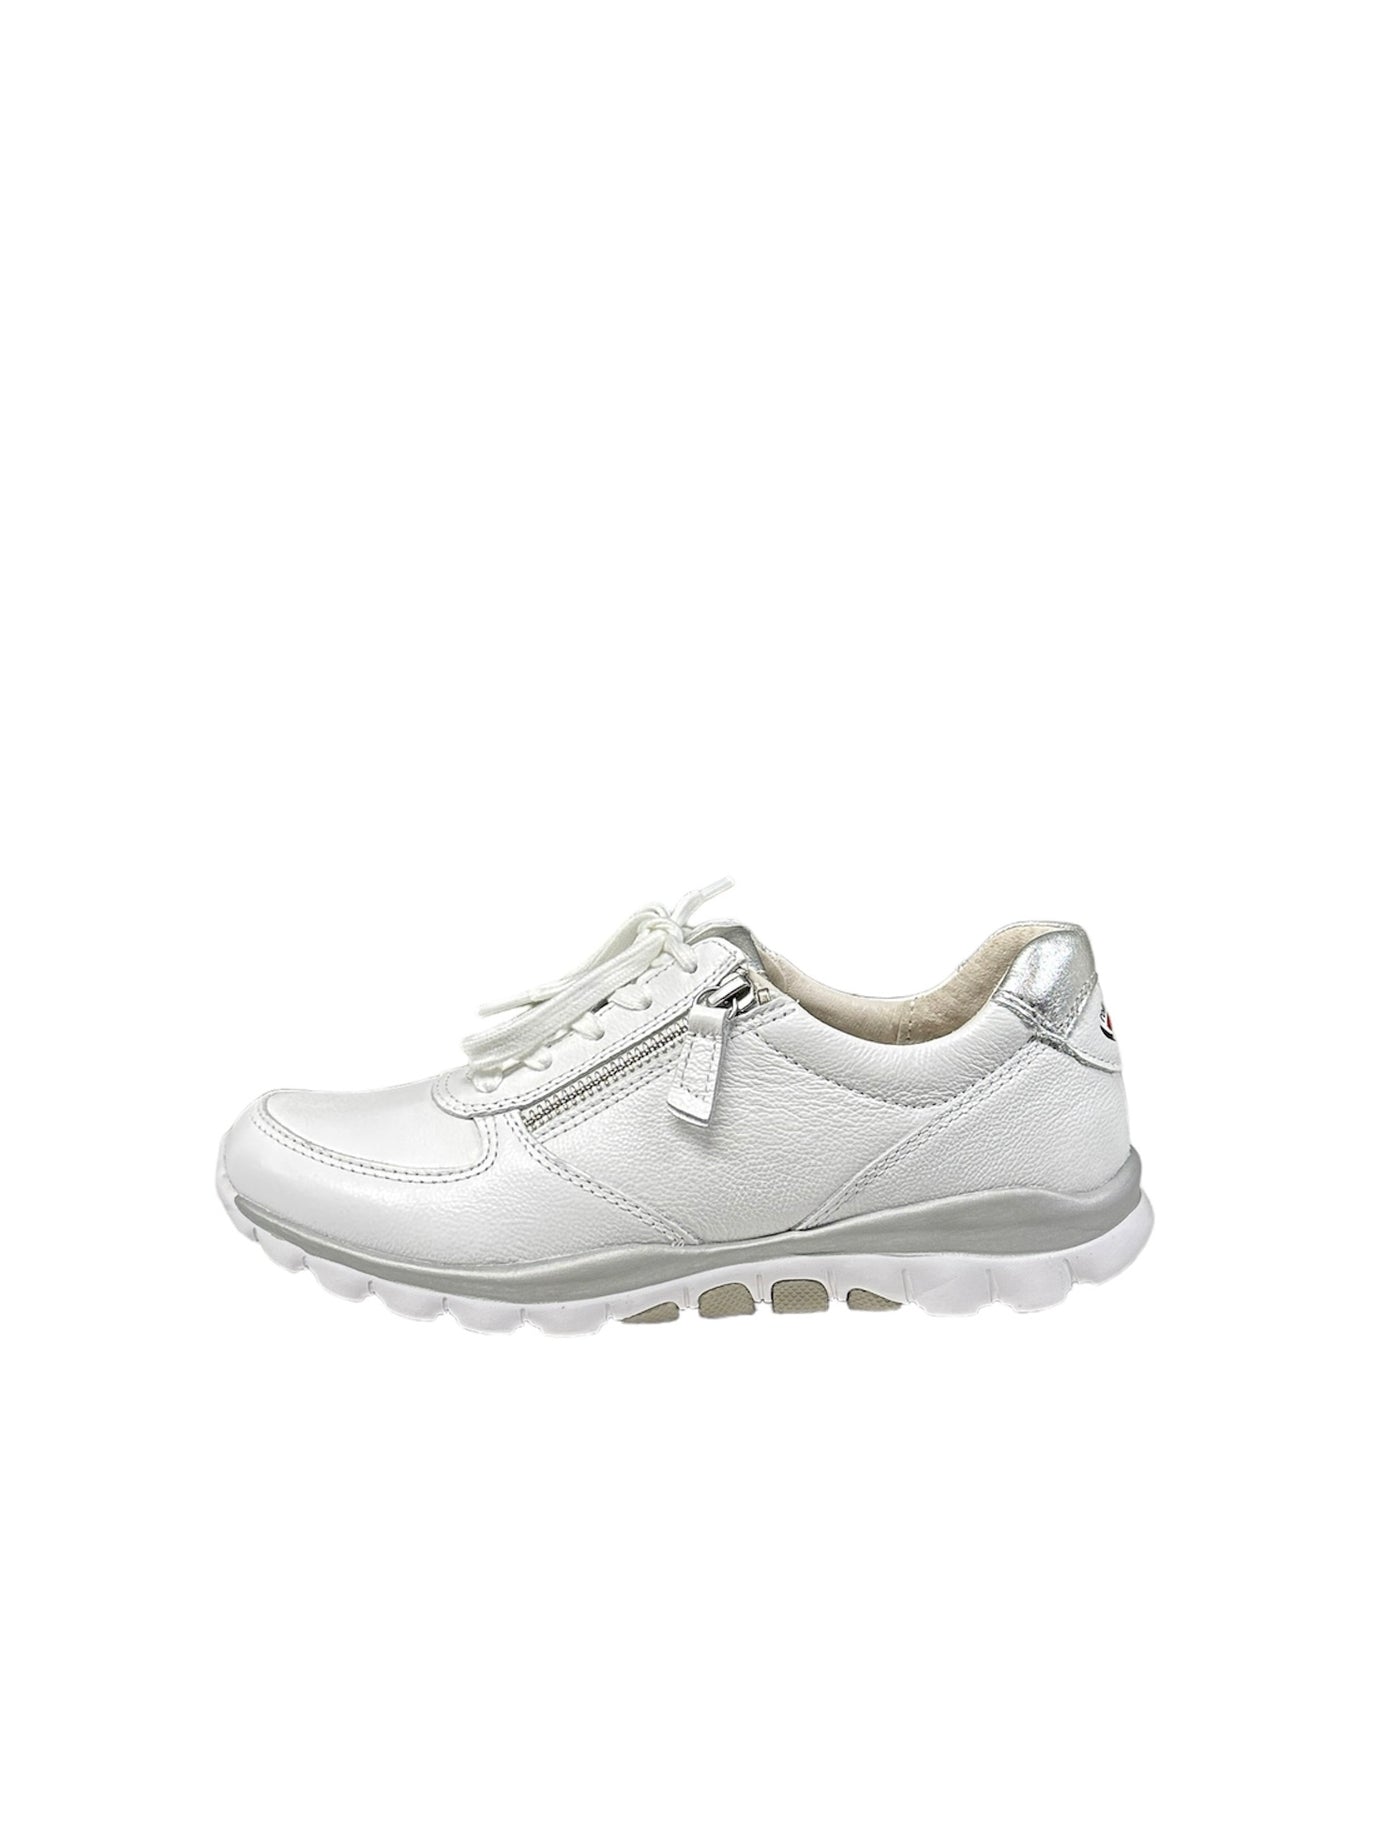 White & Grey Lace Up Runner With Zip Detailing